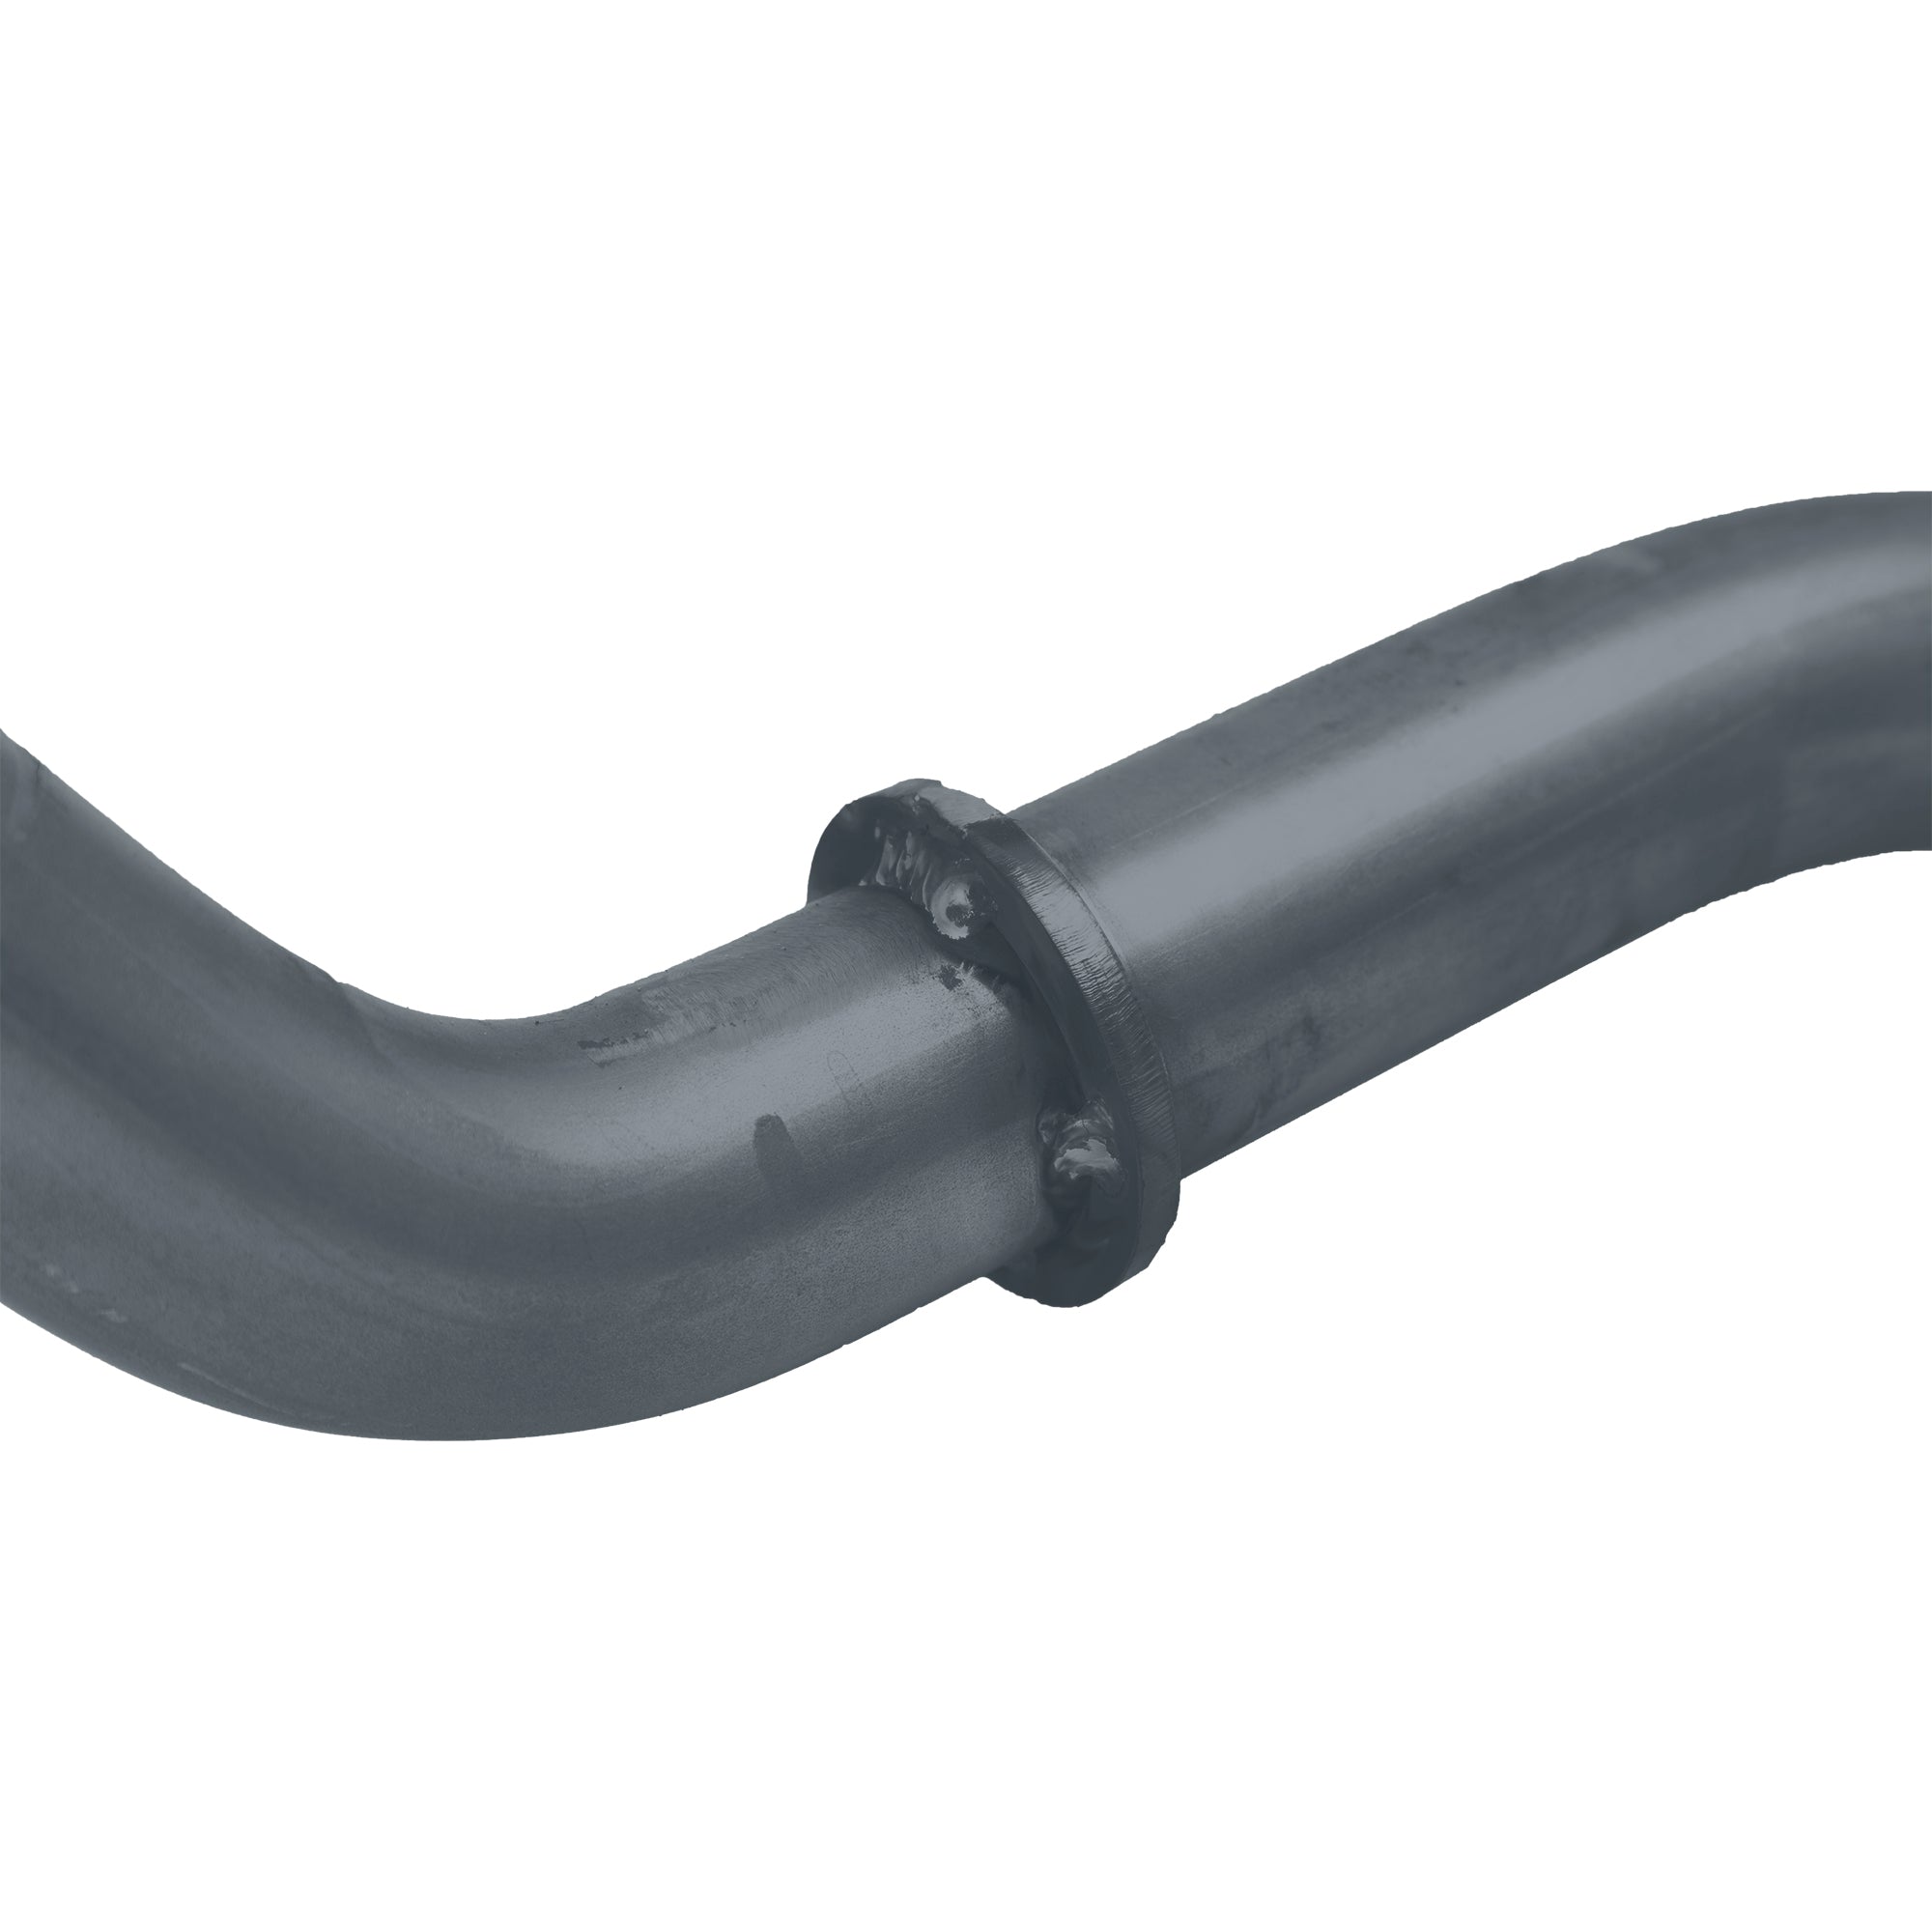 1 3/8" / 35mm Front Anti-Sway Bar w/ Hardware